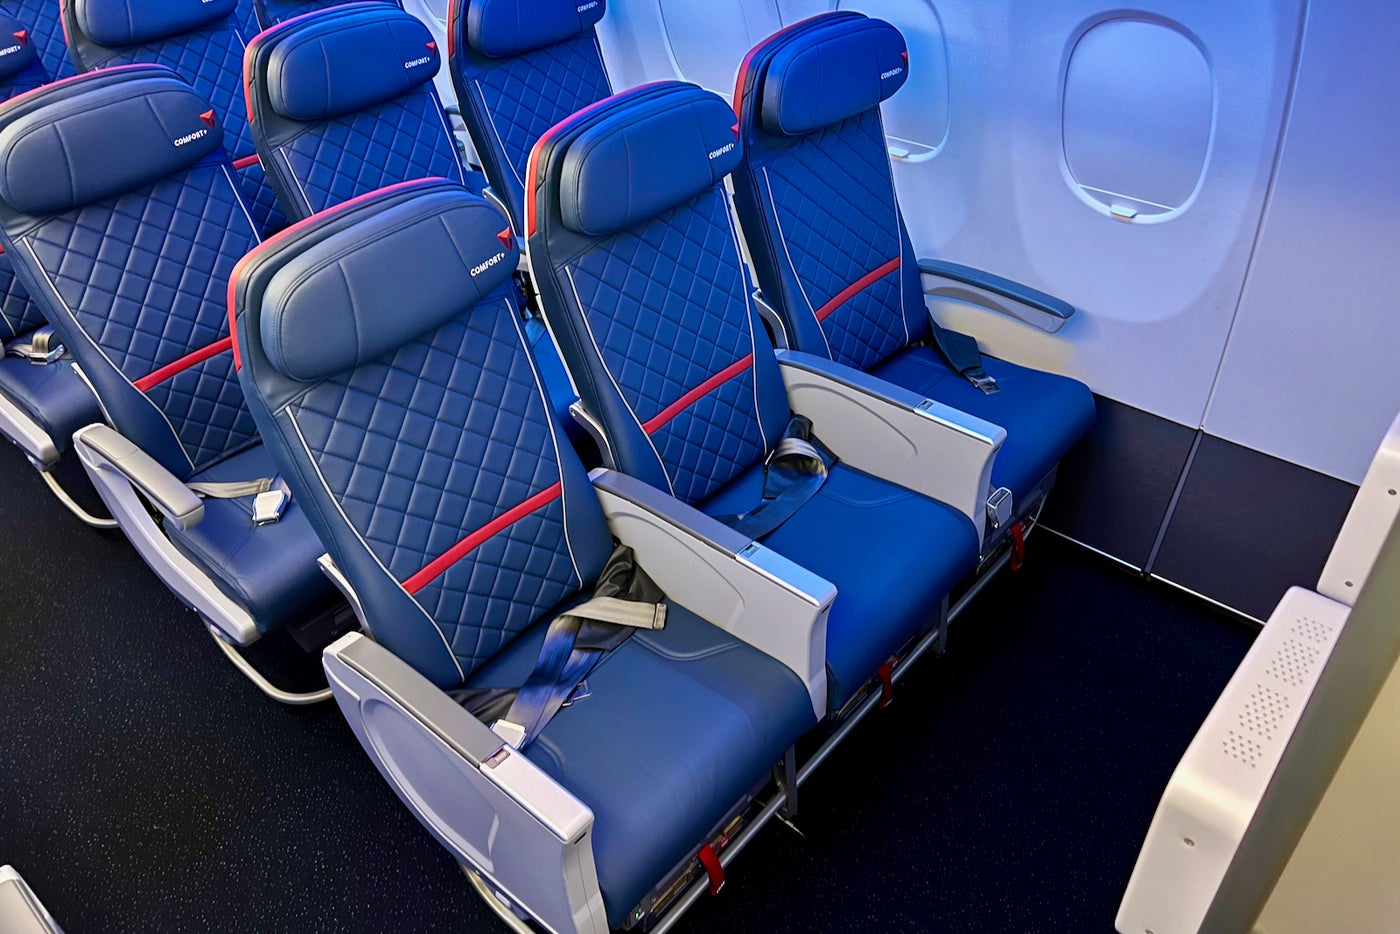 First look: Inside Delta's newest jet, the Airbus A321neo